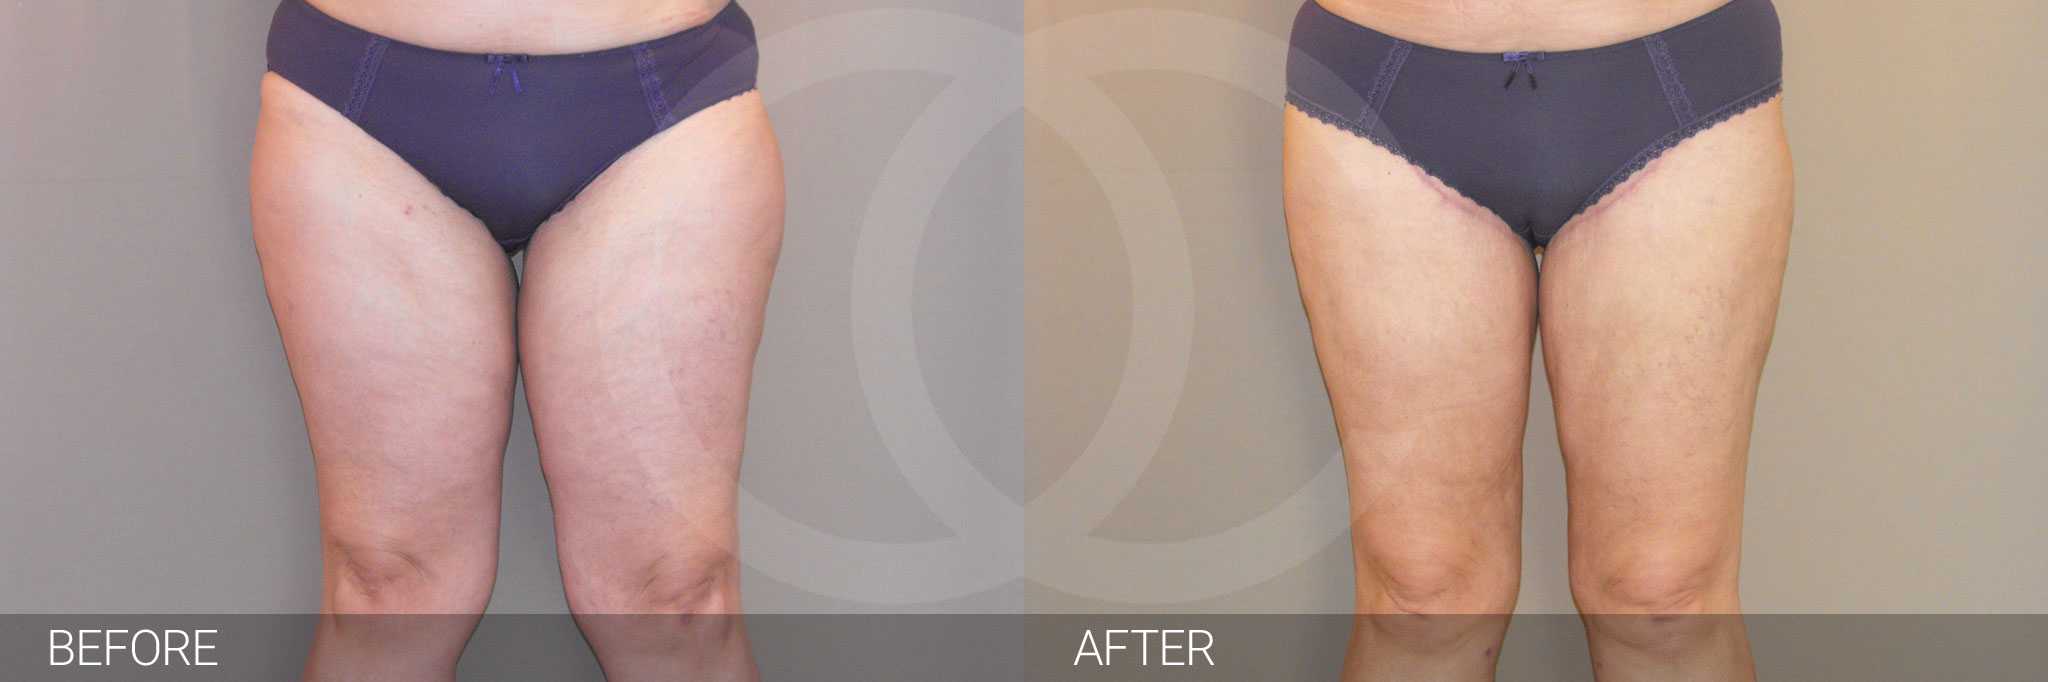 Thigh Lift Inner Thigh ante/post-op I